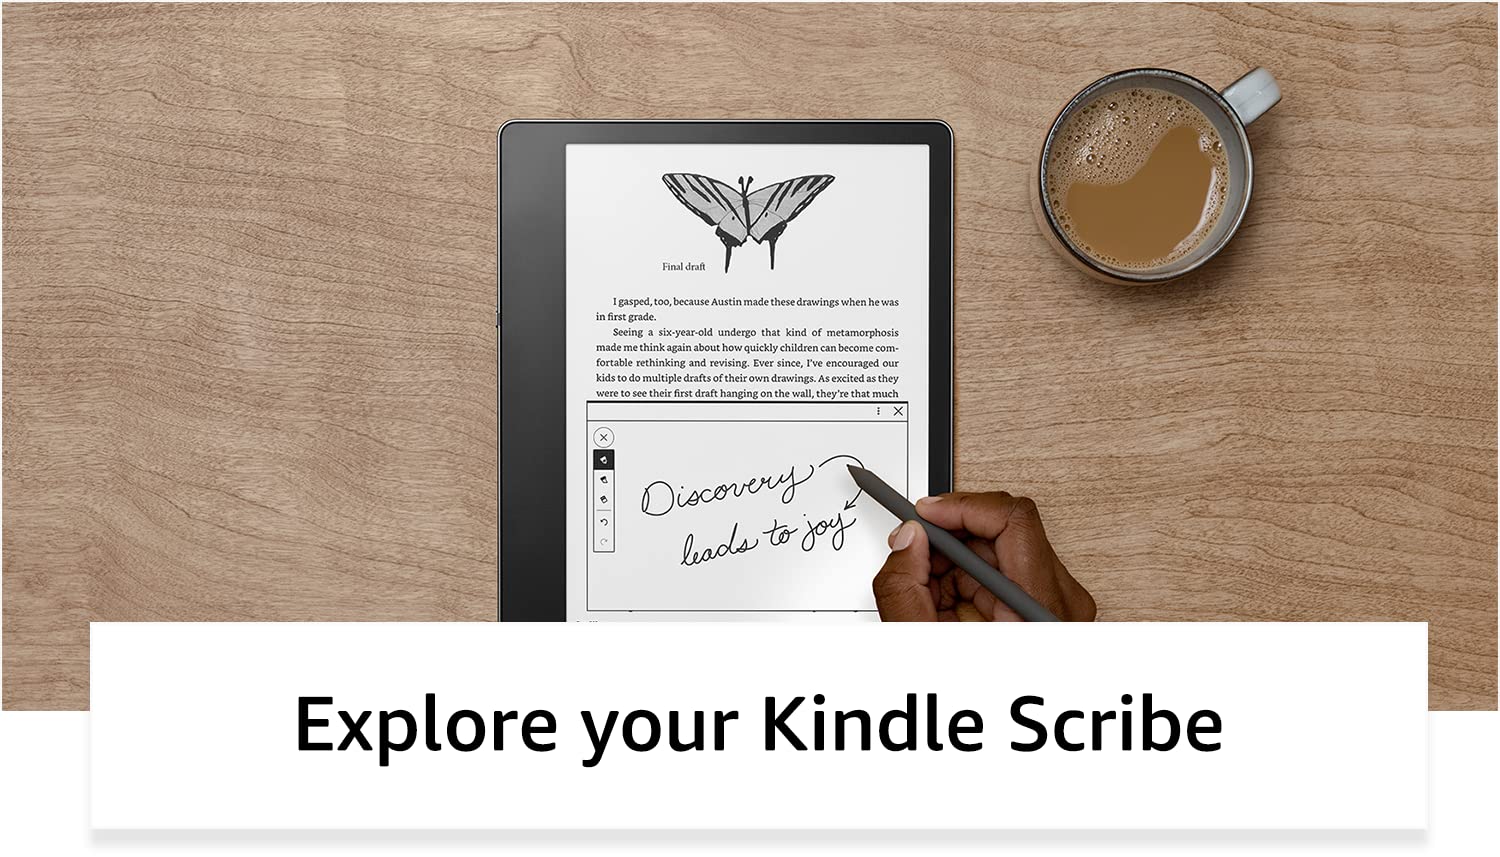 Kindle Scribe (32 GB) the first Kindle for reading, writing, journaling and sketching - with a 10.2” 300 ppi Paperwhite display, includes Premium Pen